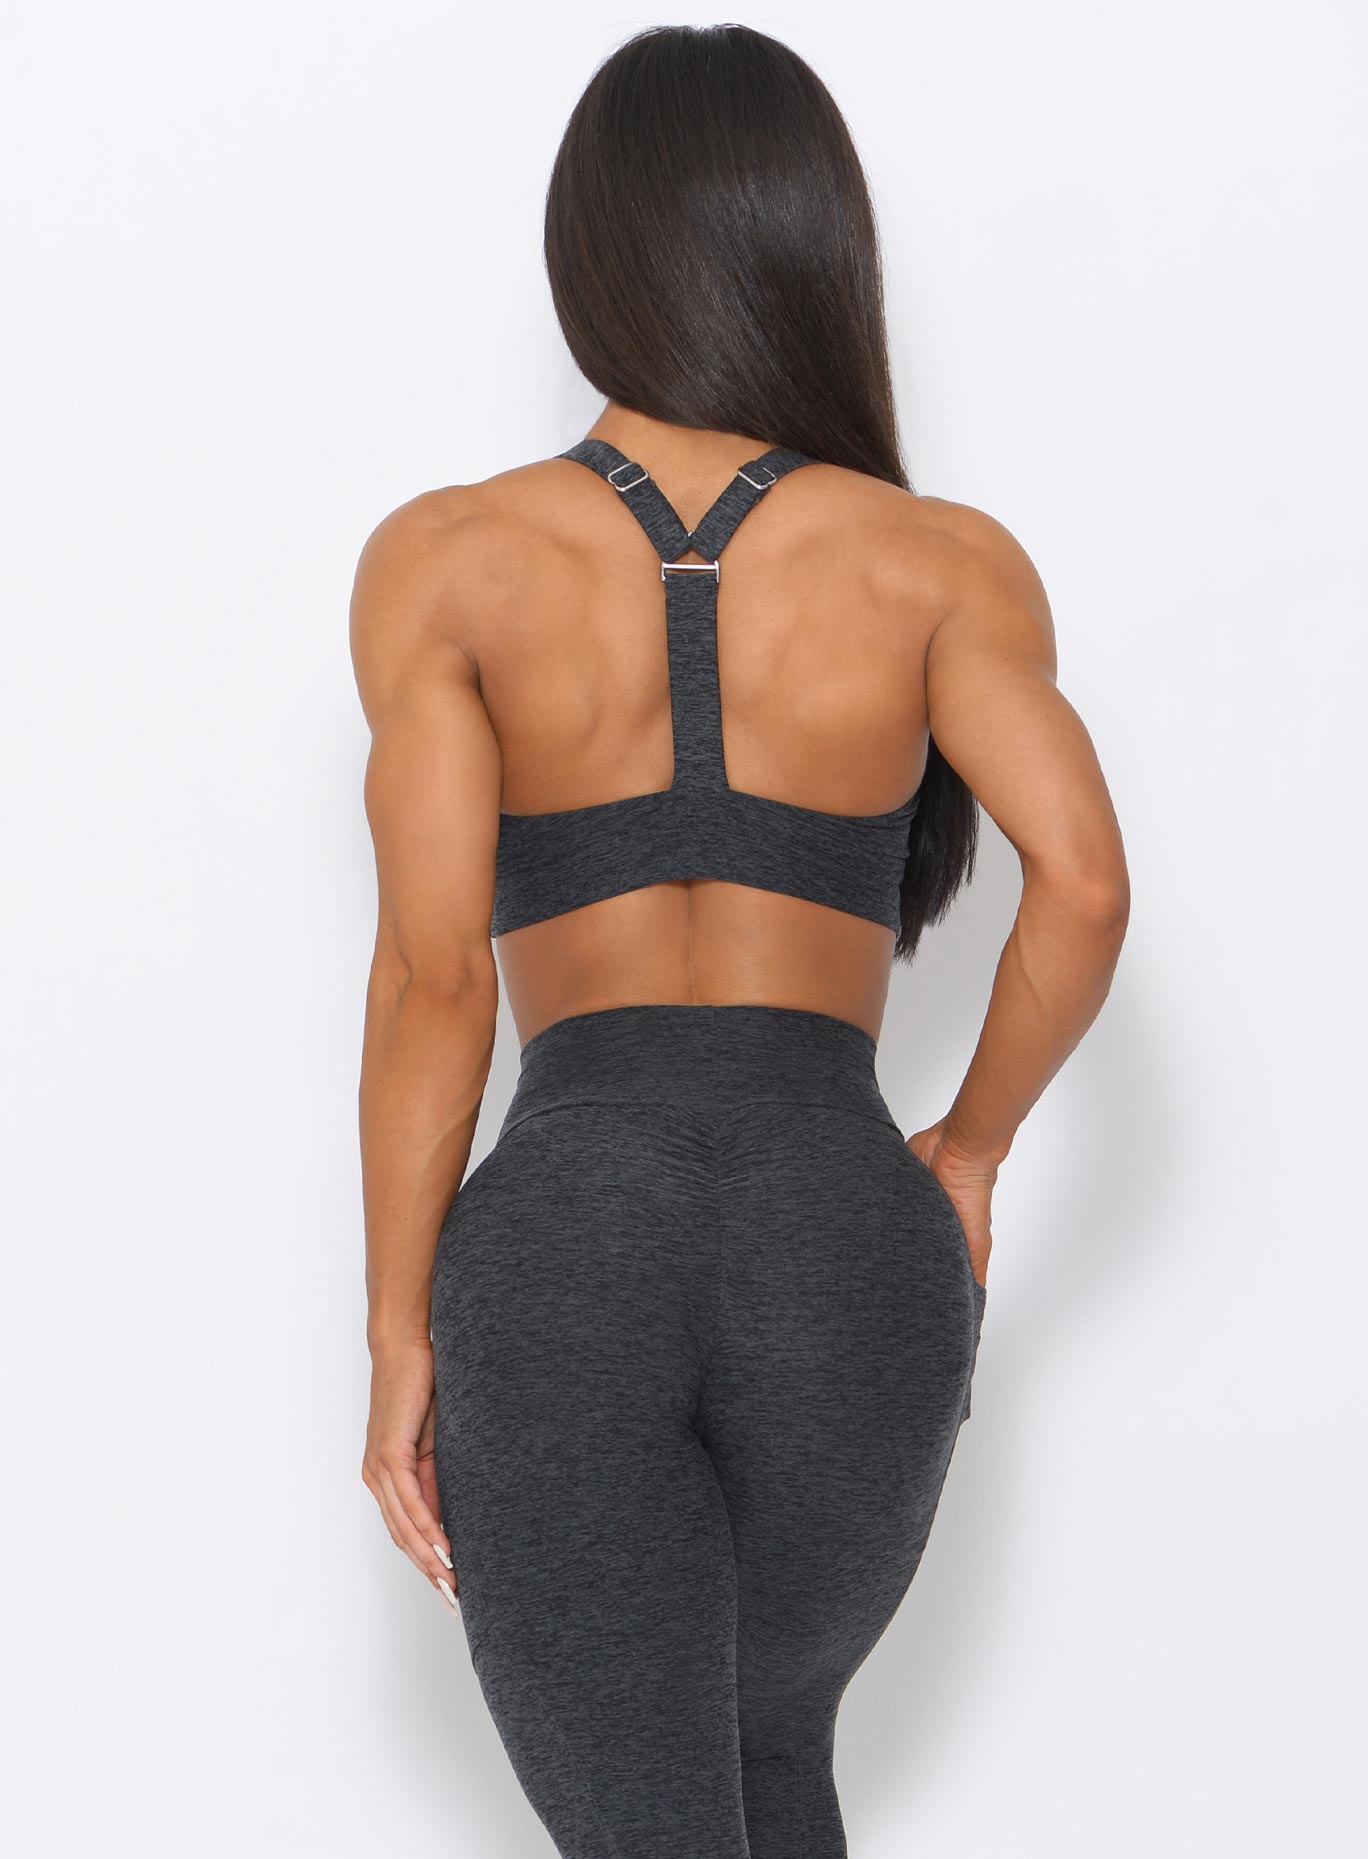 Back view of the model with her right hand on waist wearing our perfection sports bra in charcoal color and a matching leggings